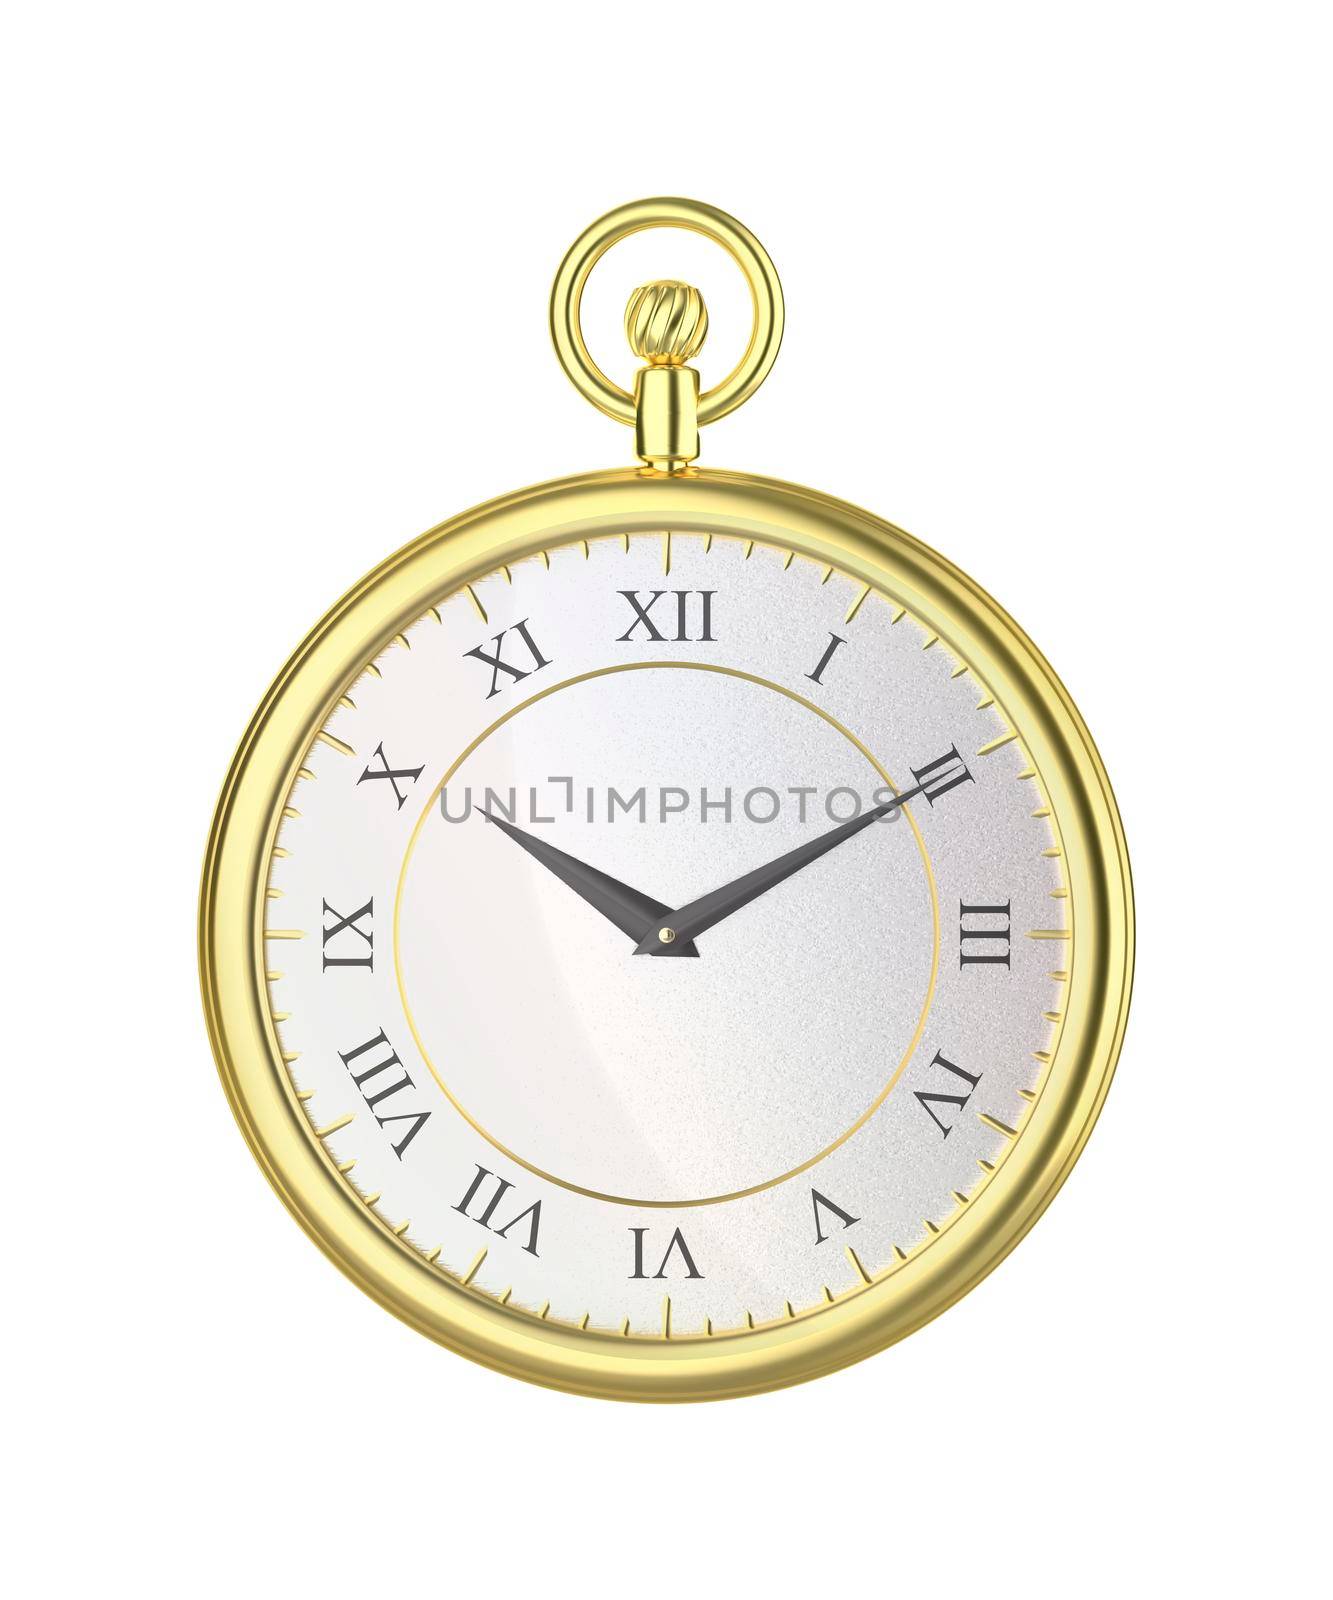 Luxury golden pocket watch isolated on white background, front view